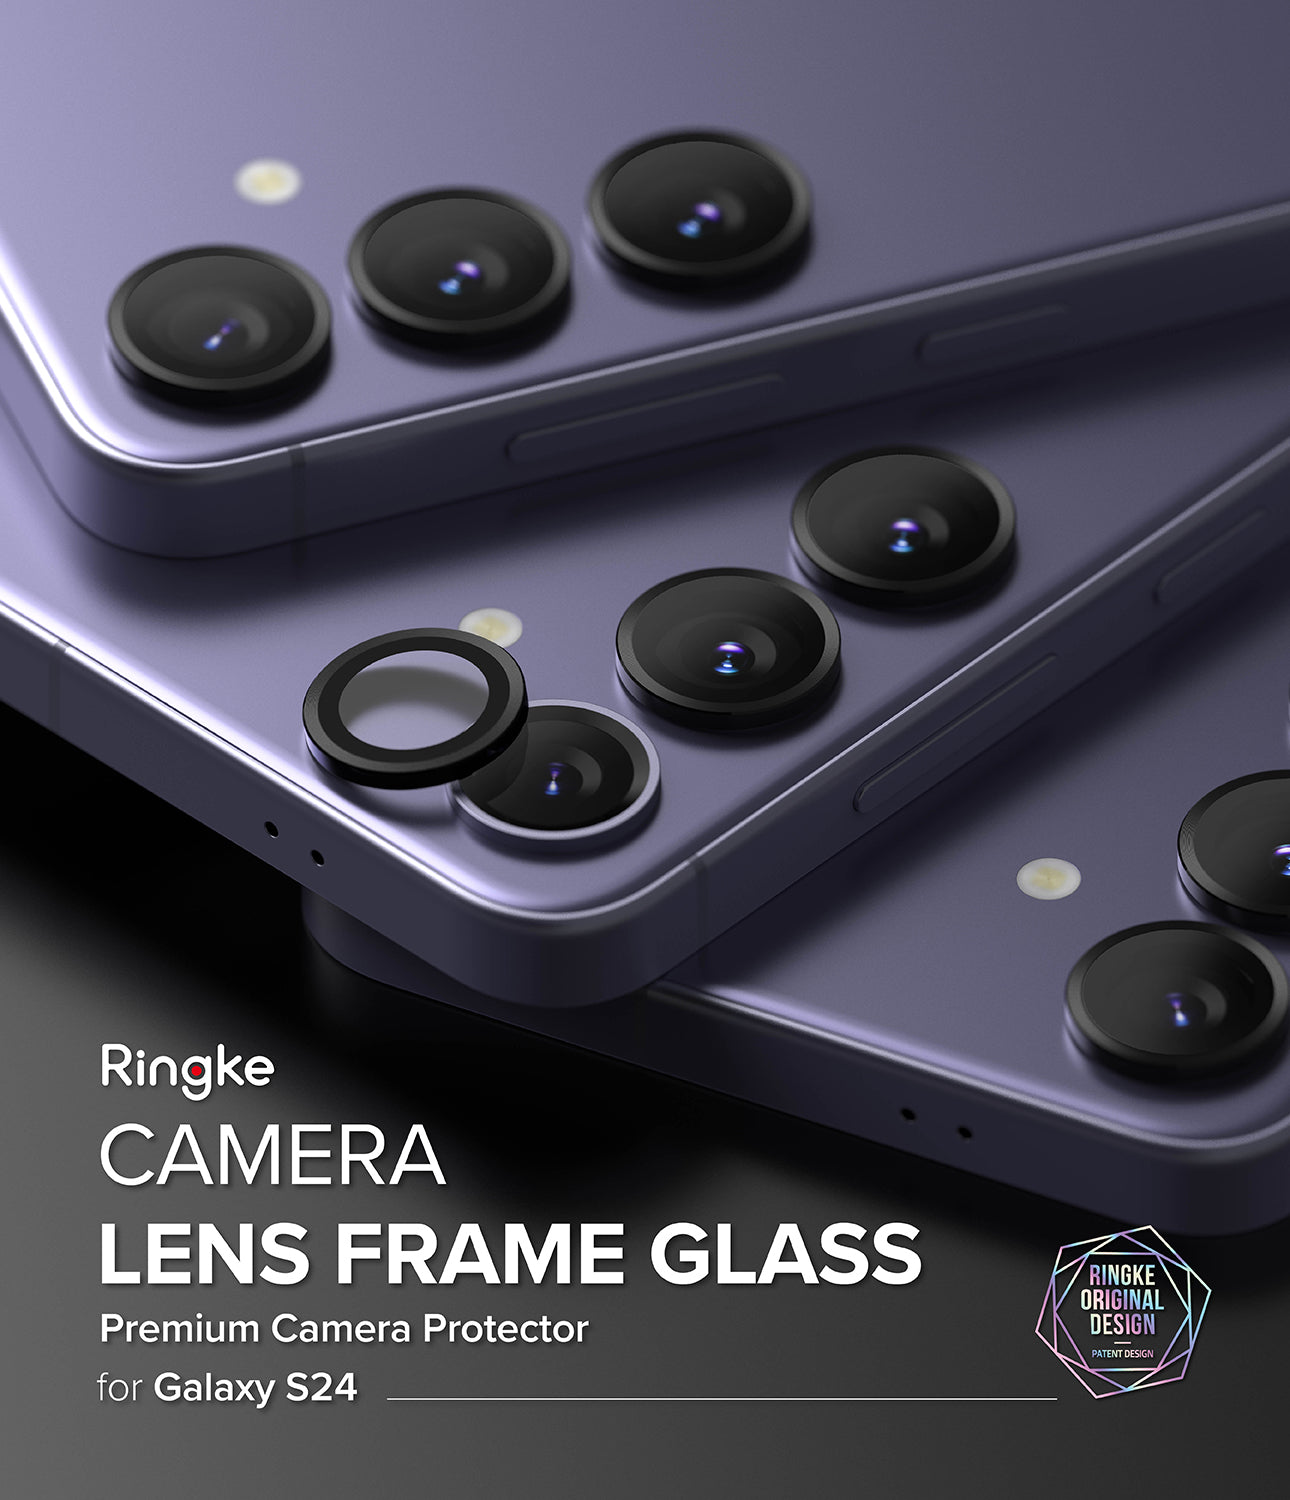 Galaxy S24 Lens Protector | Camera Lens Frame Glass - By Ringke